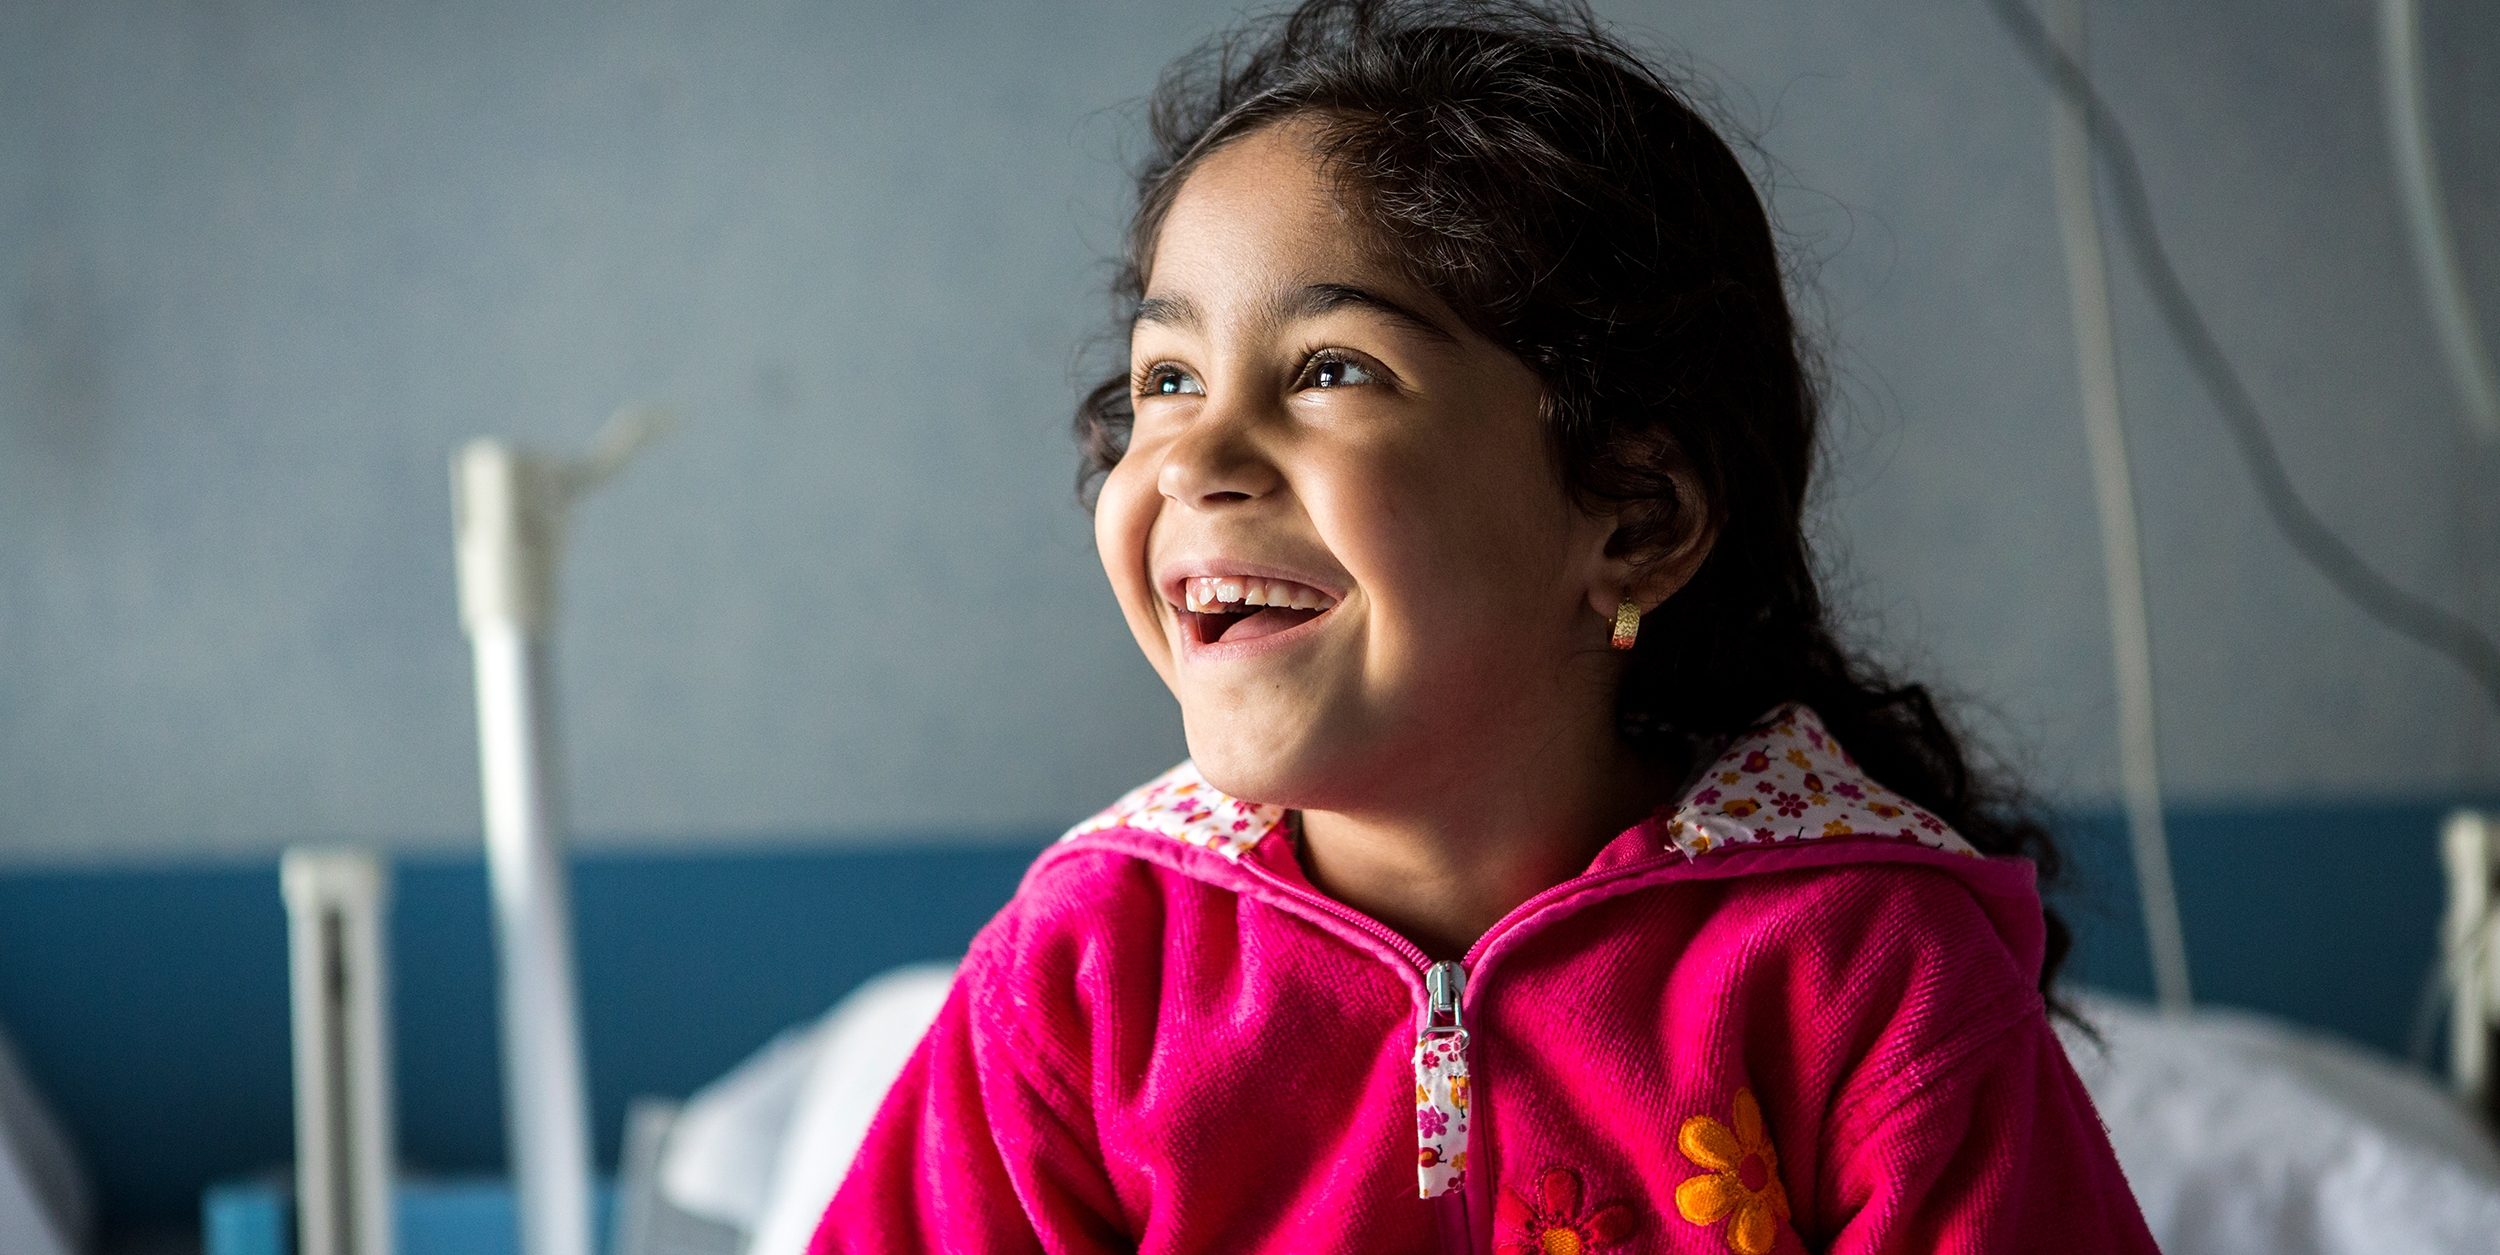 A five-year-old from Syria, plays in her hospital bedroom where she was treated for asthma after being rescued by the Save the Children vessel in the Mediterranean Sea near the coast of Italy. Photo Credit: Louis Leeson/Save the Children 2016.